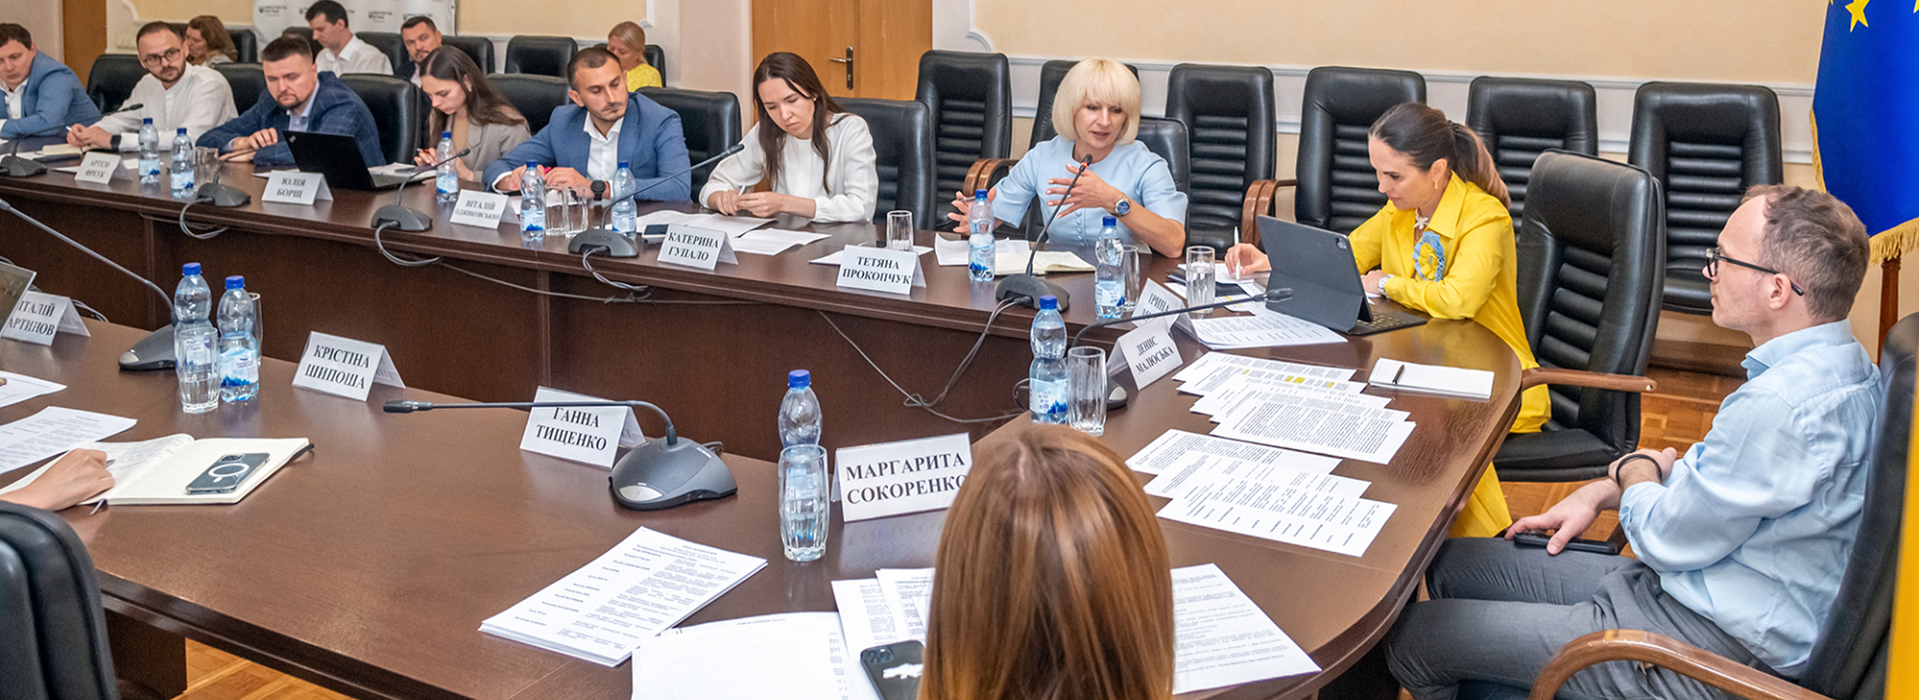 Meeting with Denys Malyuska, Minister of Justice, Iryna Mudra, Deputy Minister of Justice, and Margarita Sokorenko, Commissioner of the European Court of Human Rights